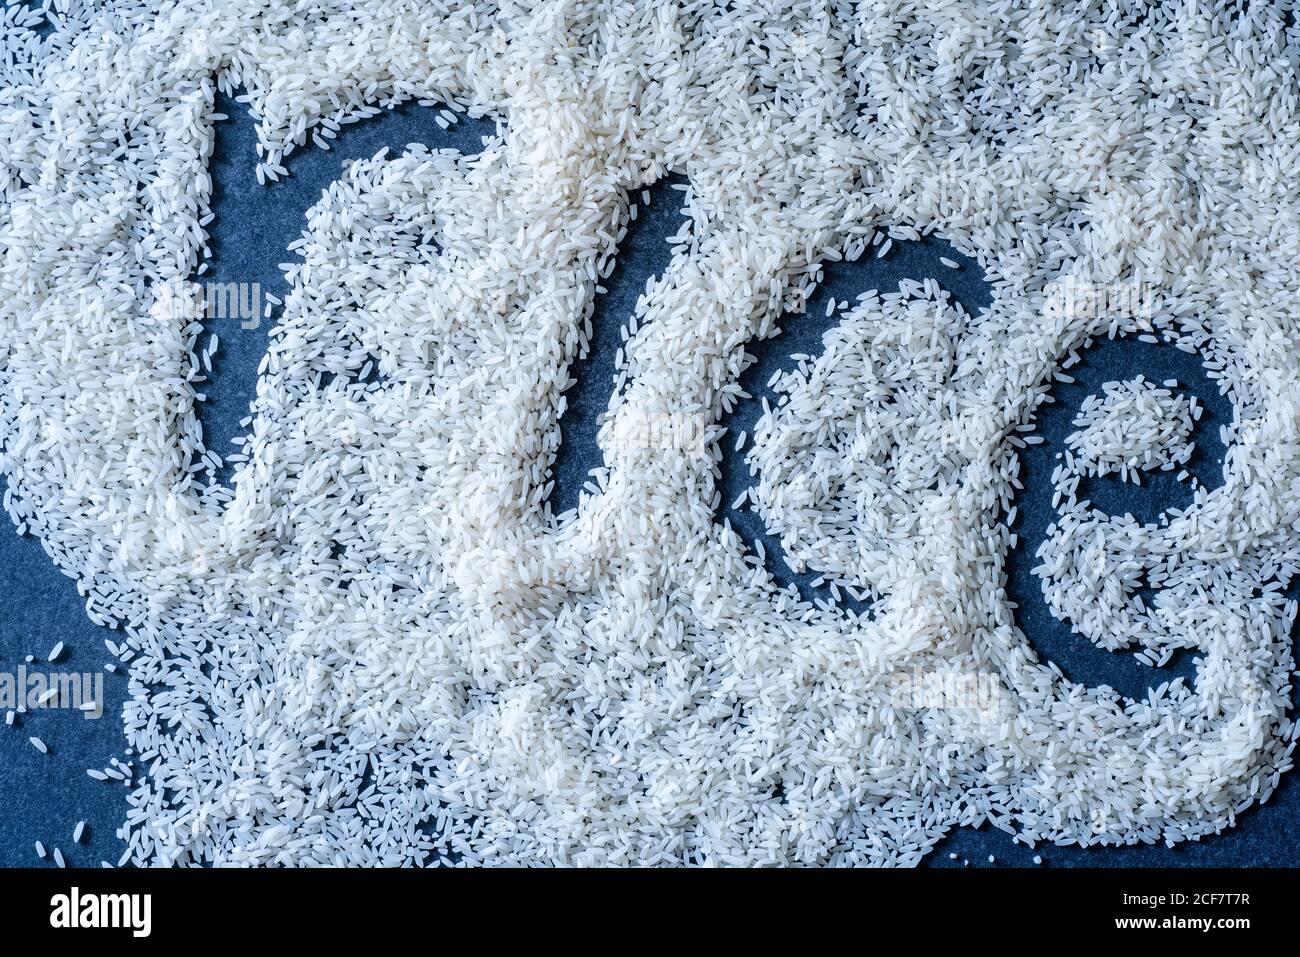 Word rice spelled out in rice grains, overhead view Stock Photo